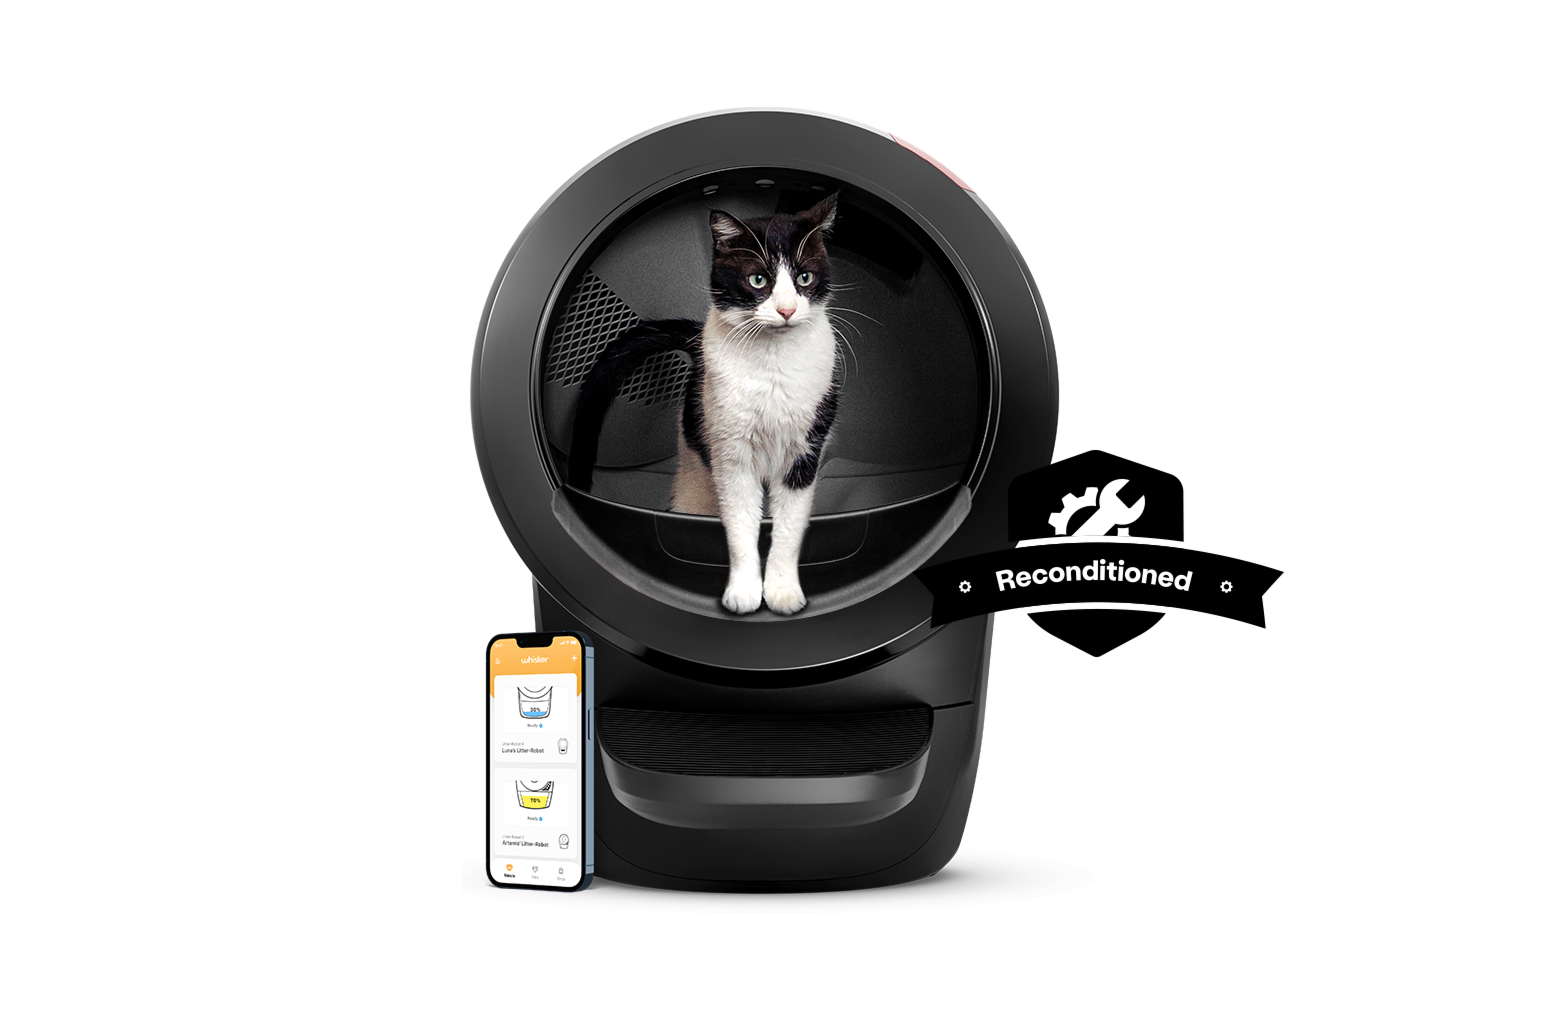 Black and white cat in the Litter-Robot 4 Reconditioned